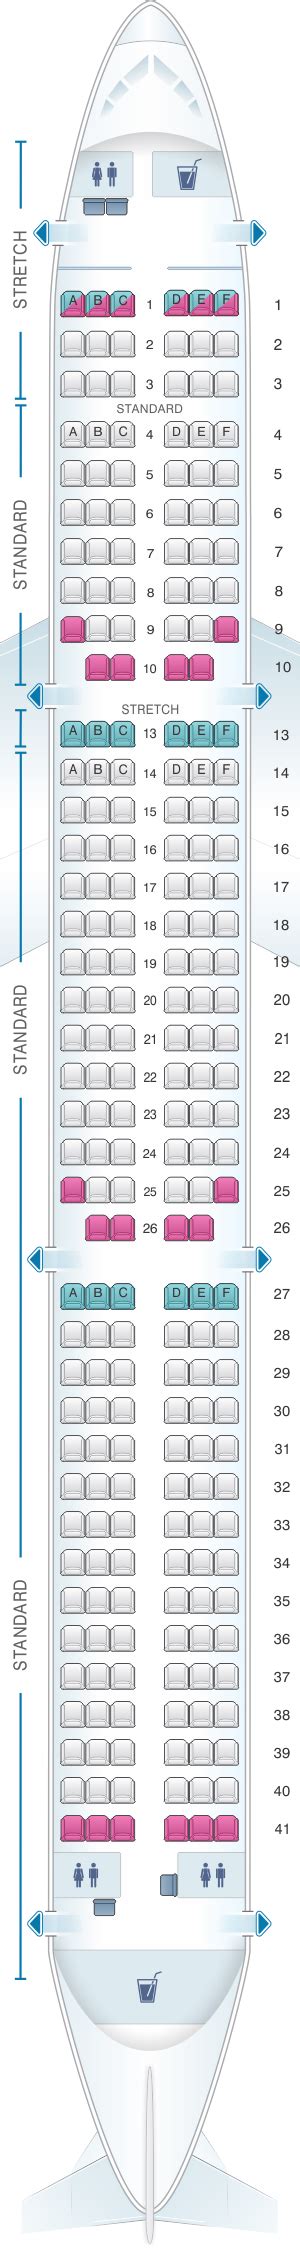 Frontier airlines plane seating chart. Frontier Airlines currently has the largest fleet of A320neos in the US. Photo: Frontier Airlines. Frontier Airlines has debuted its first aircraft with new, lighter-weight seats. The airline first revealed the new seats, coming from Recaro, back in December, with the first jet outfitted with these seats due in March of 2021. 